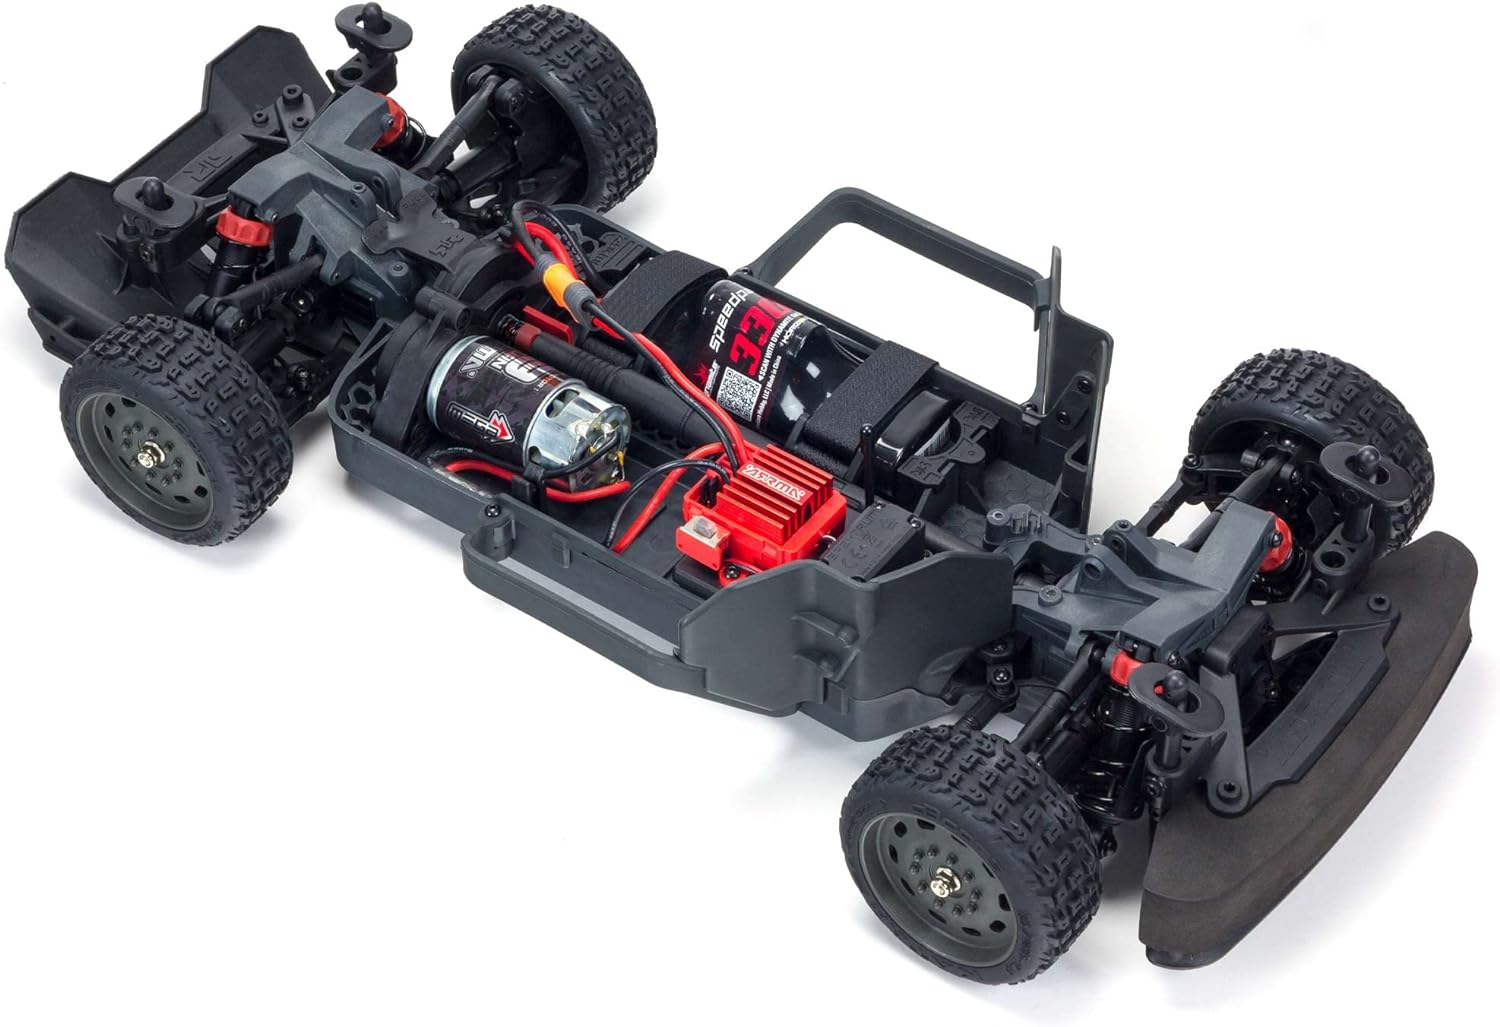 ARRMA RC Truck 1/8 Infraction 4X4 MEGA Resto-Mod Truck RTR (4 AA Batteries for Transmitter Not Included) Review